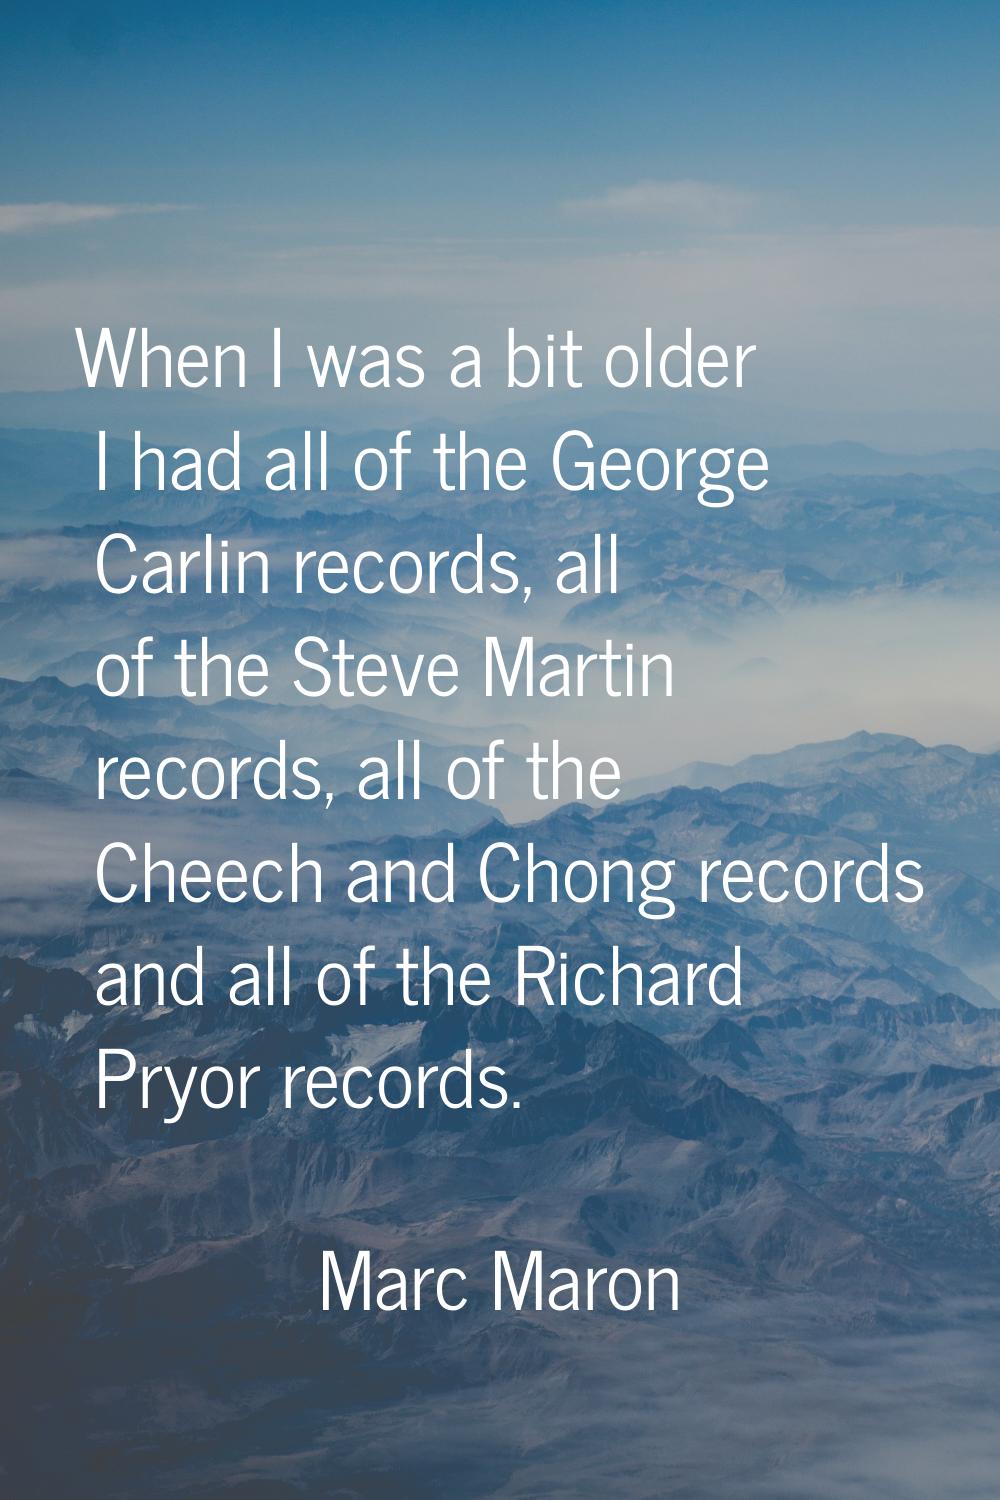 When I was a bit older I had all of the George Carlin records, all of the Steve Martin records, all